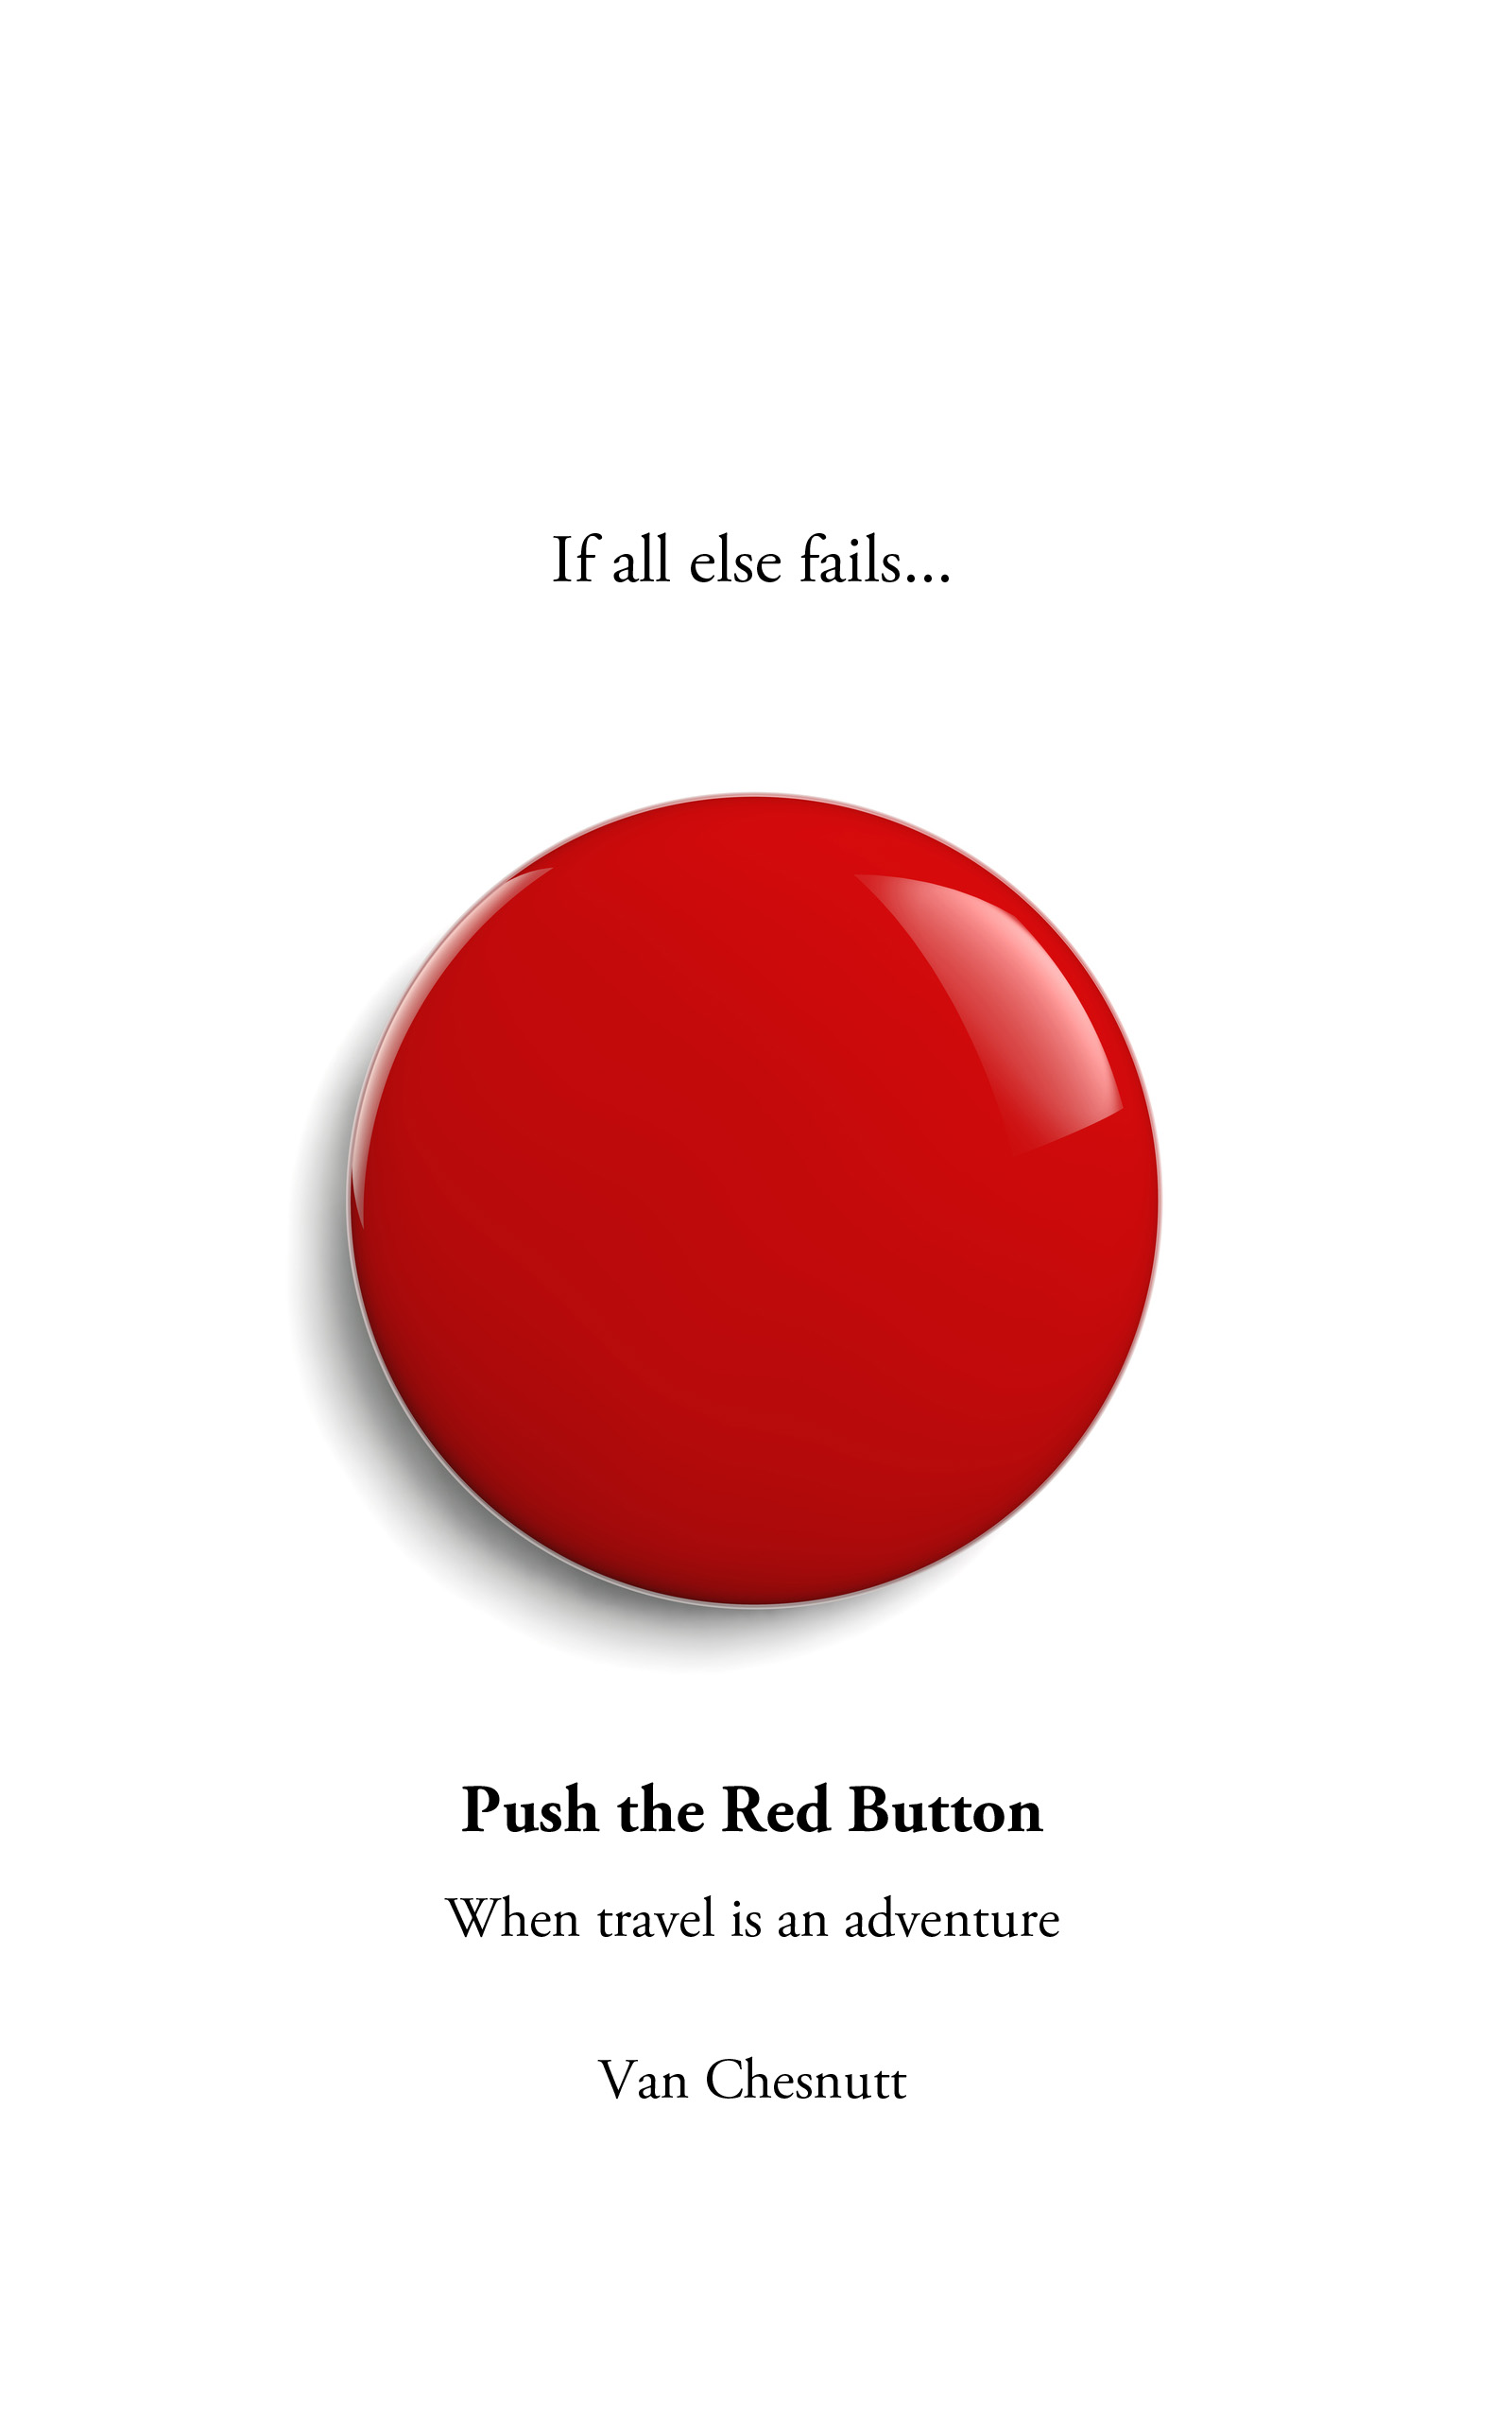 Push the Red Button book cover